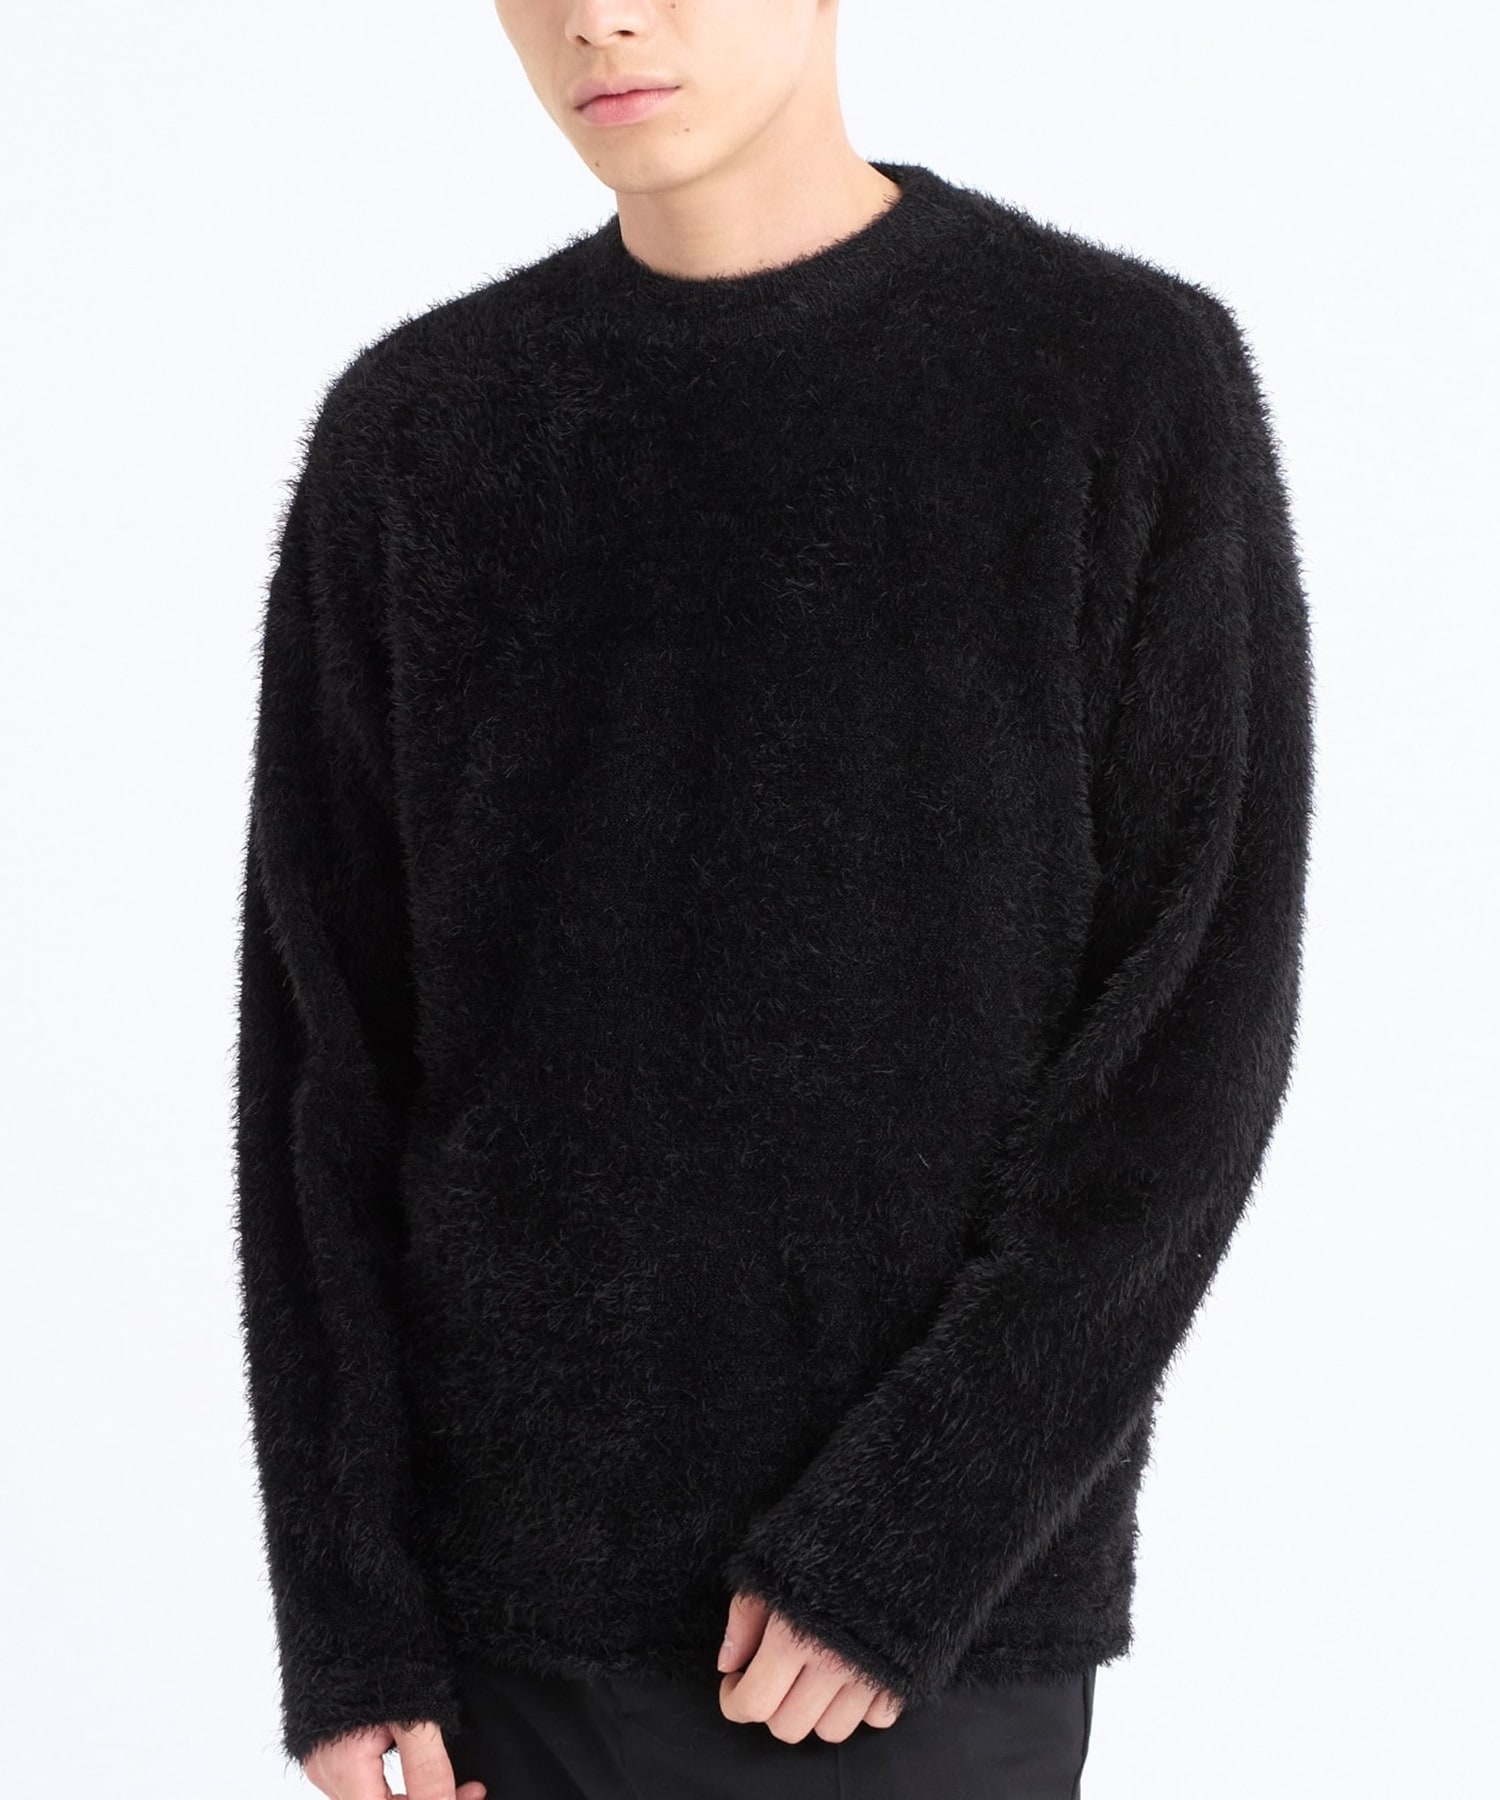 KNIT SALE ITEMS | STUDIOUS ONLINE公式通販サイト